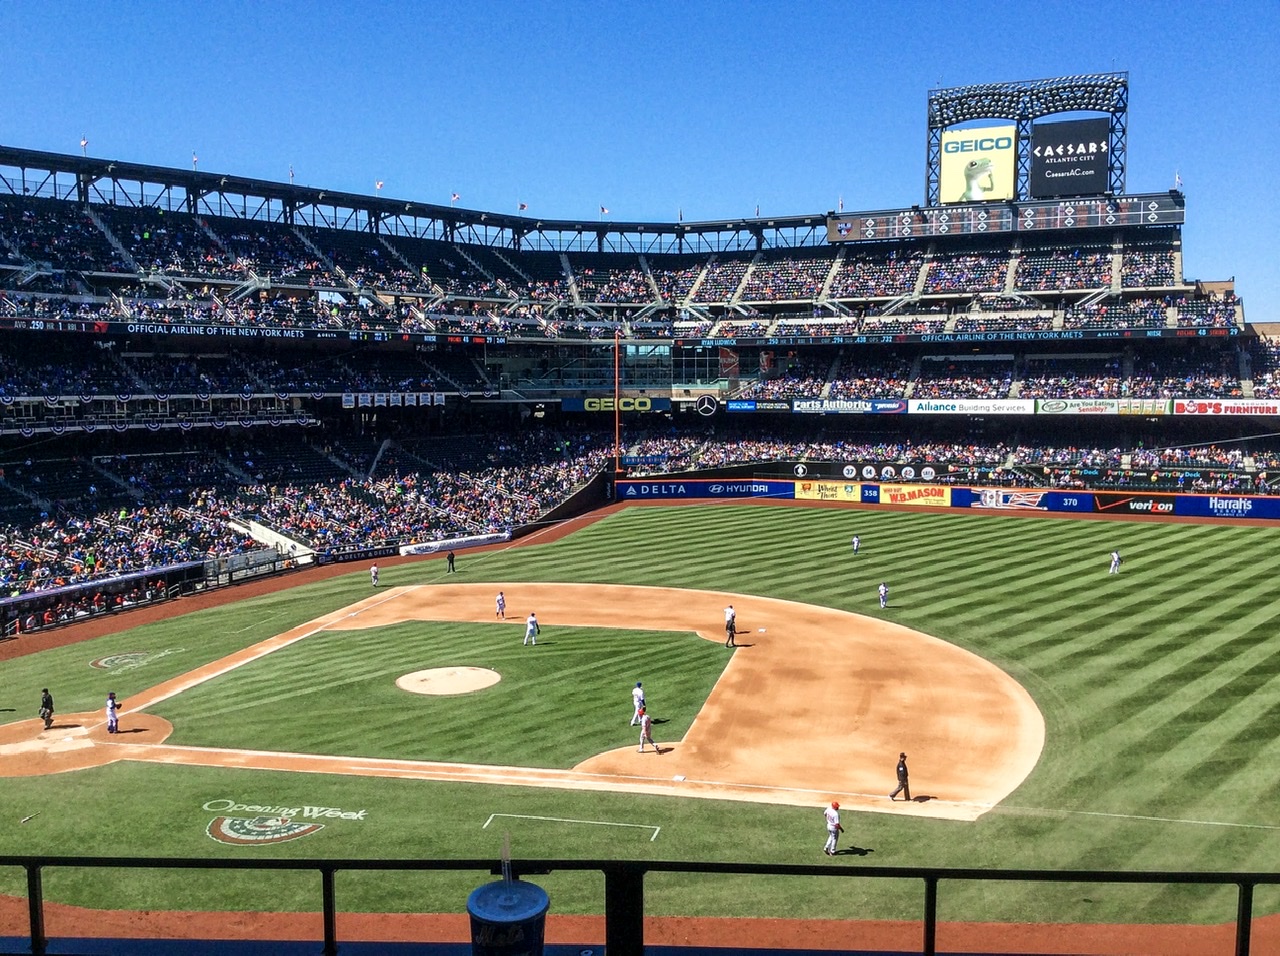 THE TOP 5 MLB STADIUMS REVEALED